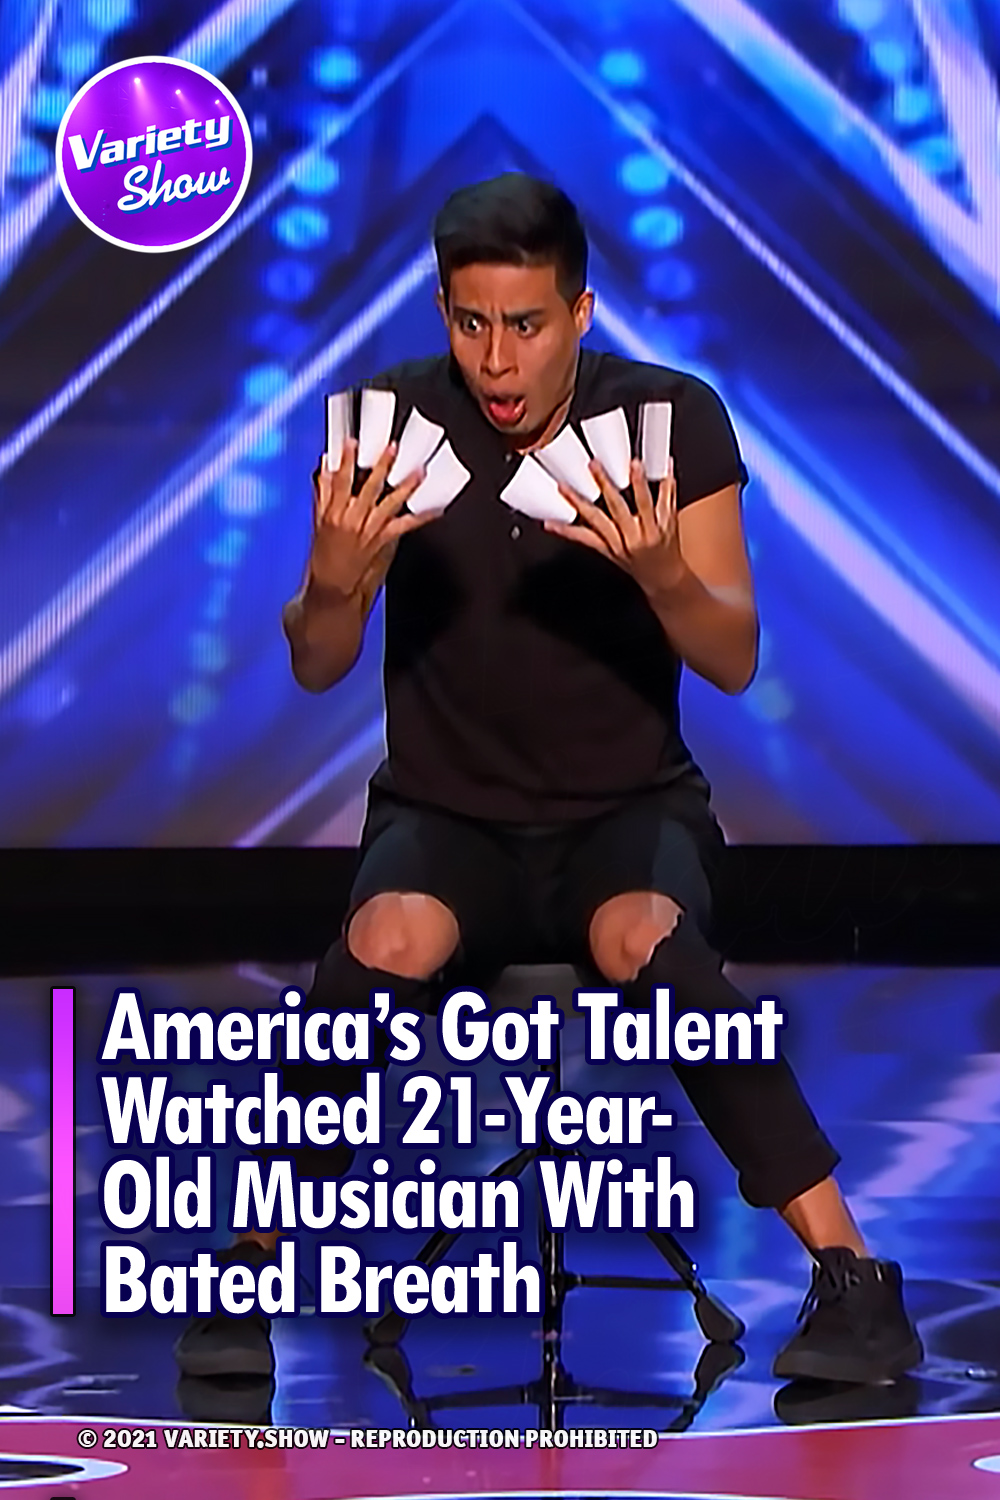 America’s Got Talent Watched 21-Year-Old Musician With Bated Breath